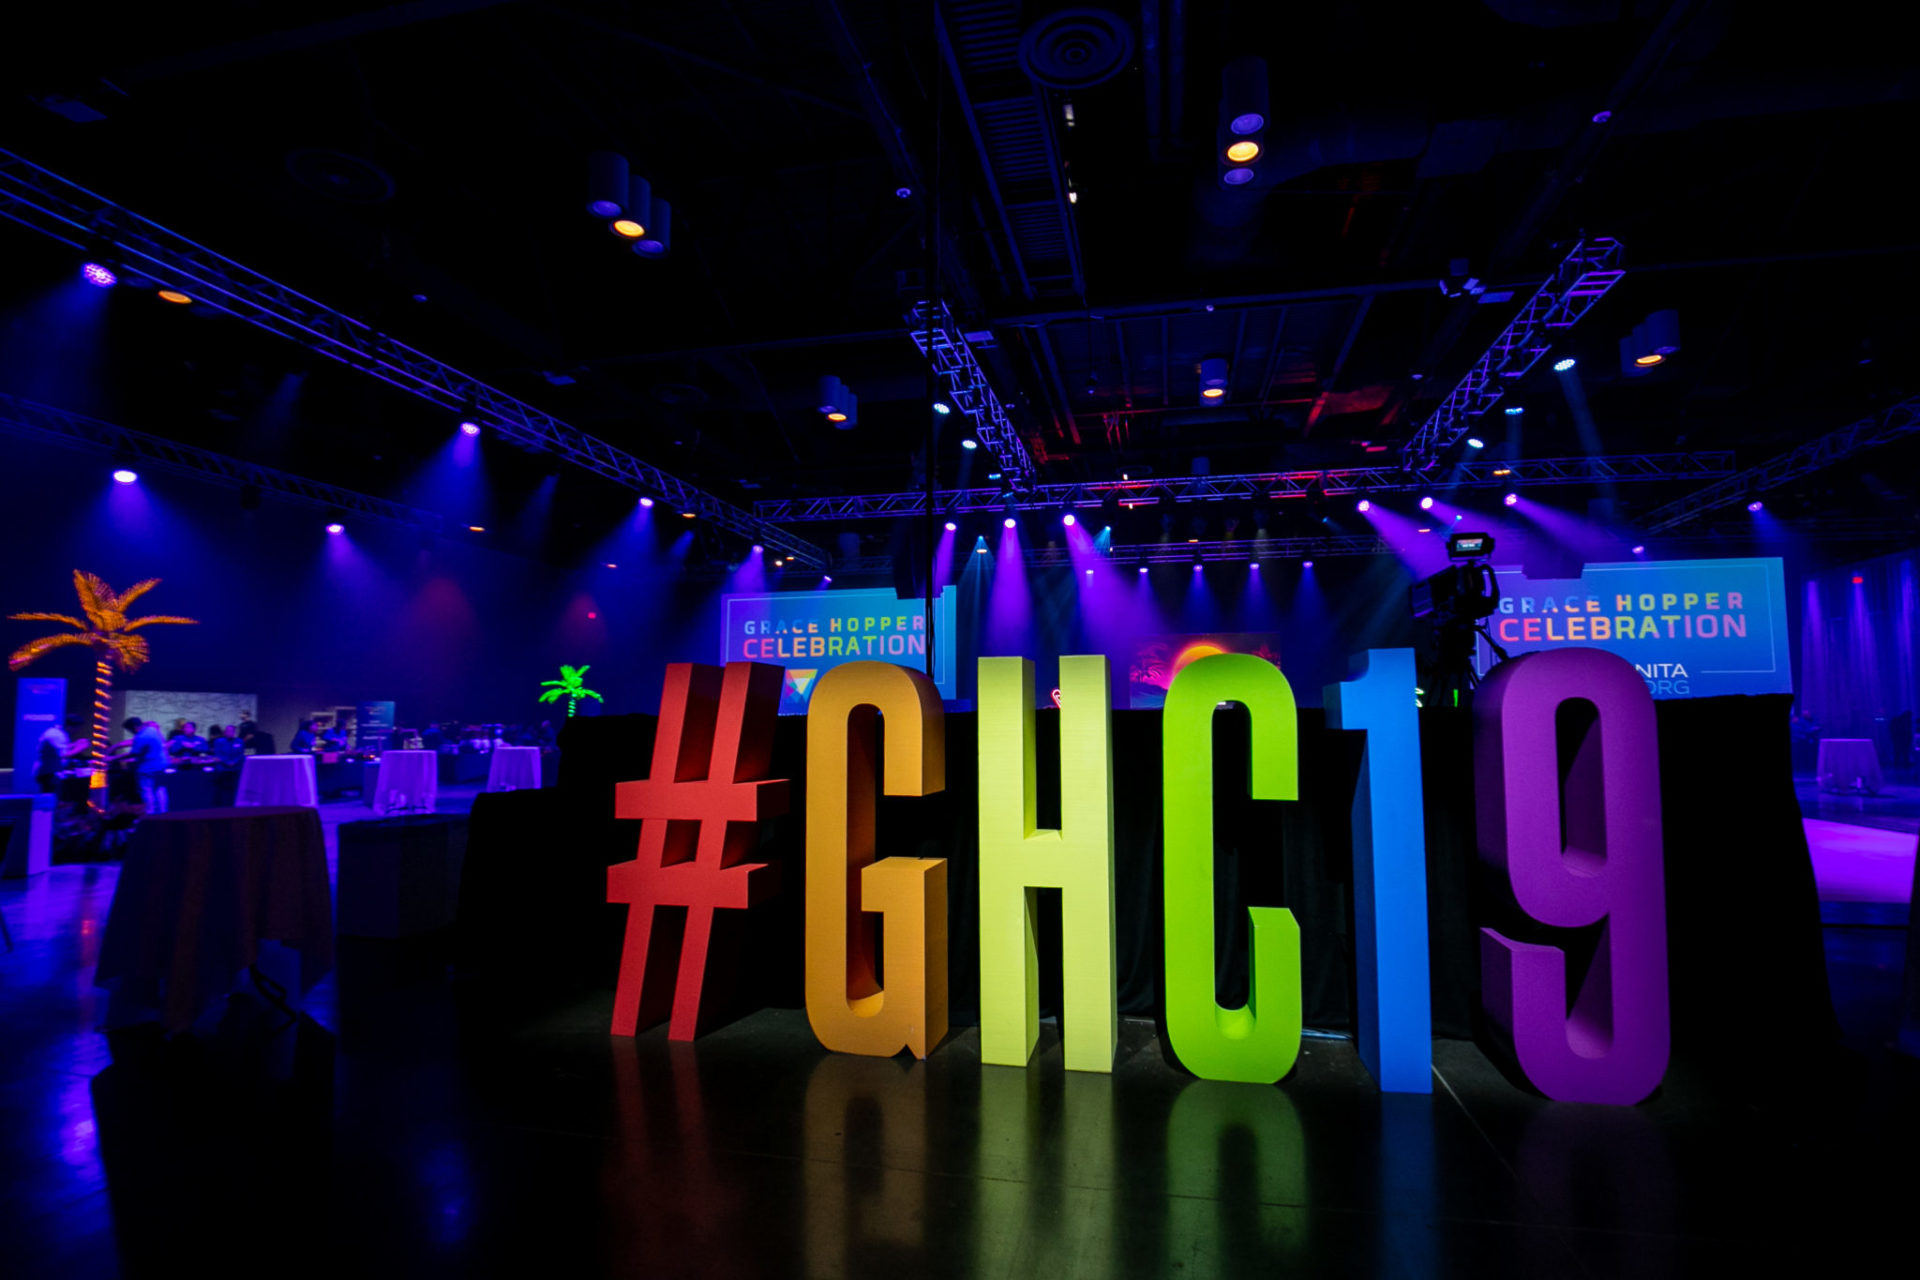 A large, colorful #GHC19 sign greets people at the entrance to the GHC 19 Evening Celebration